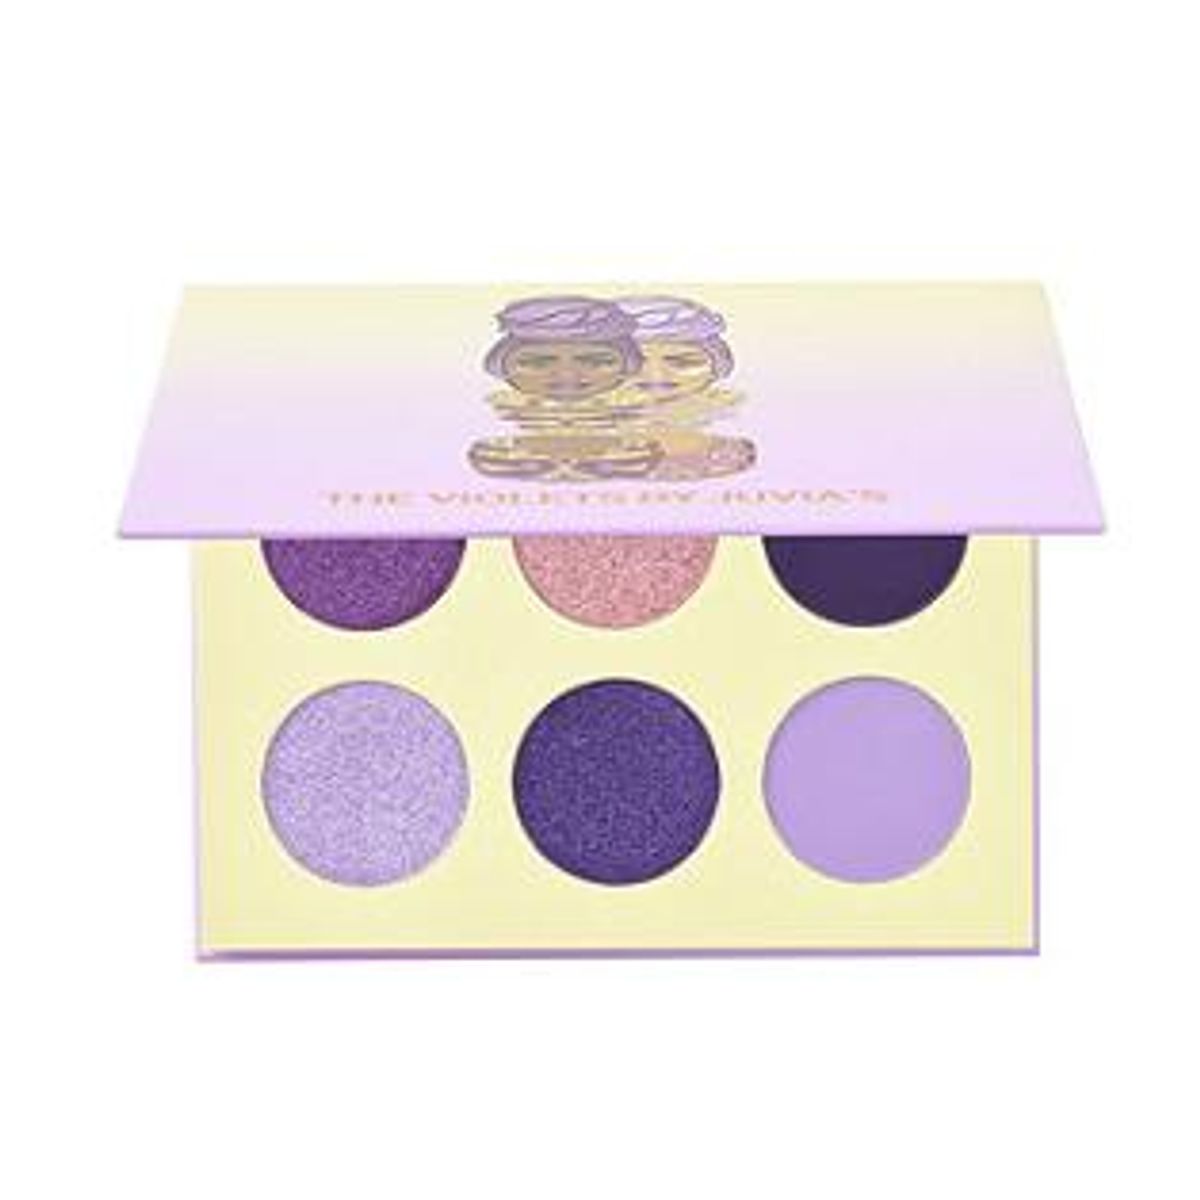 juvias place the violets eyeshadow palette